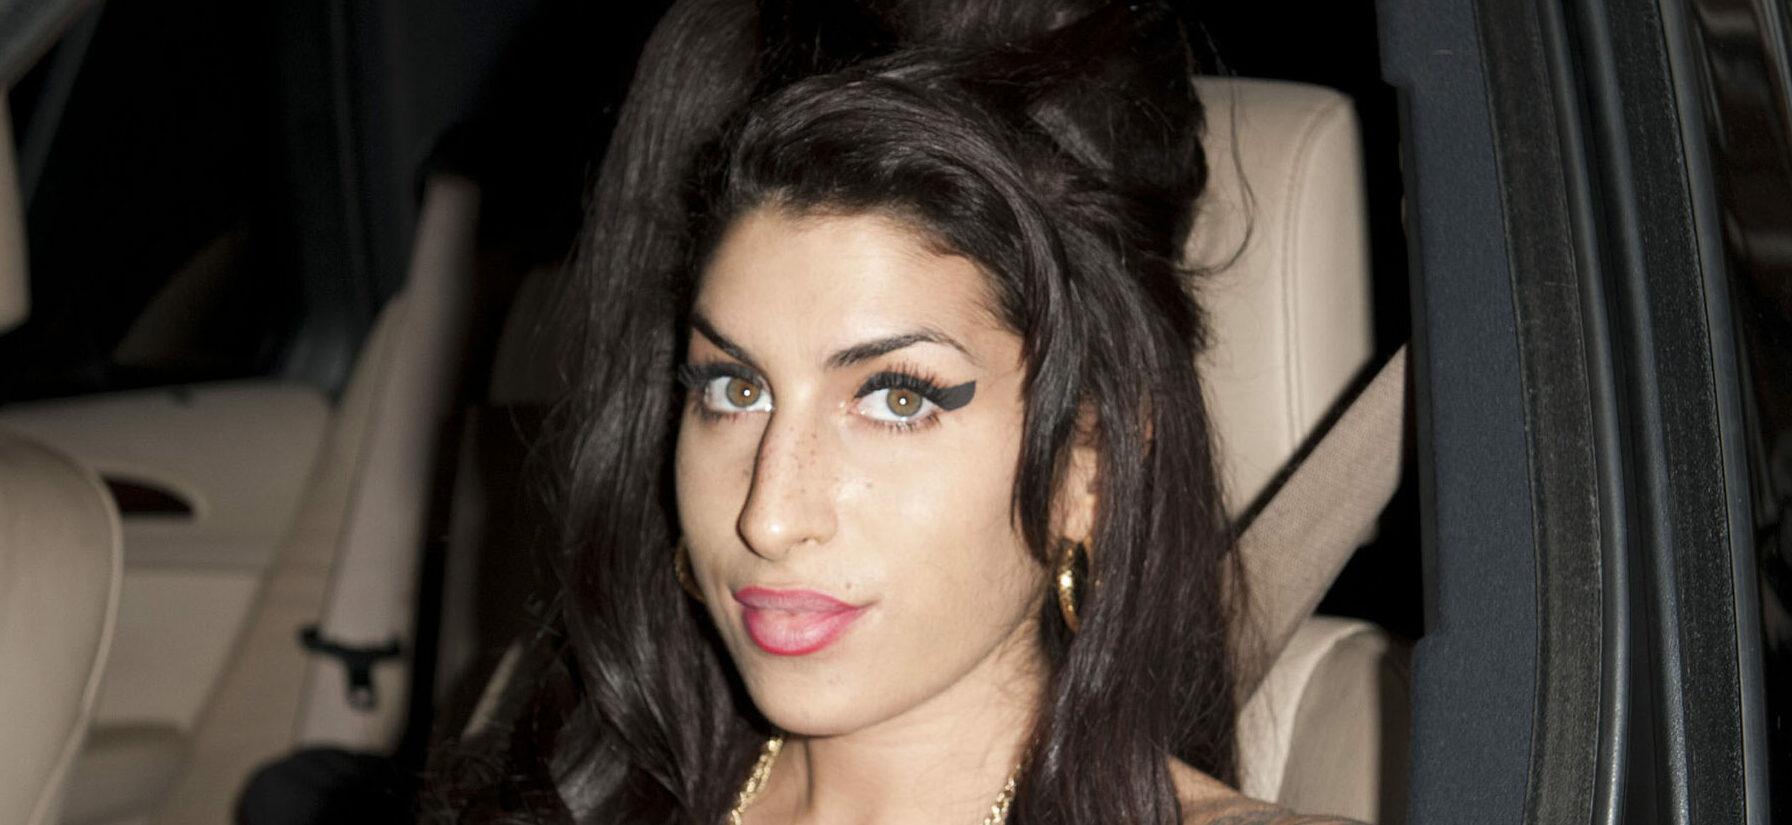 See First Photo From Amy Winehouse’s Biopic: ‘Back To Black’